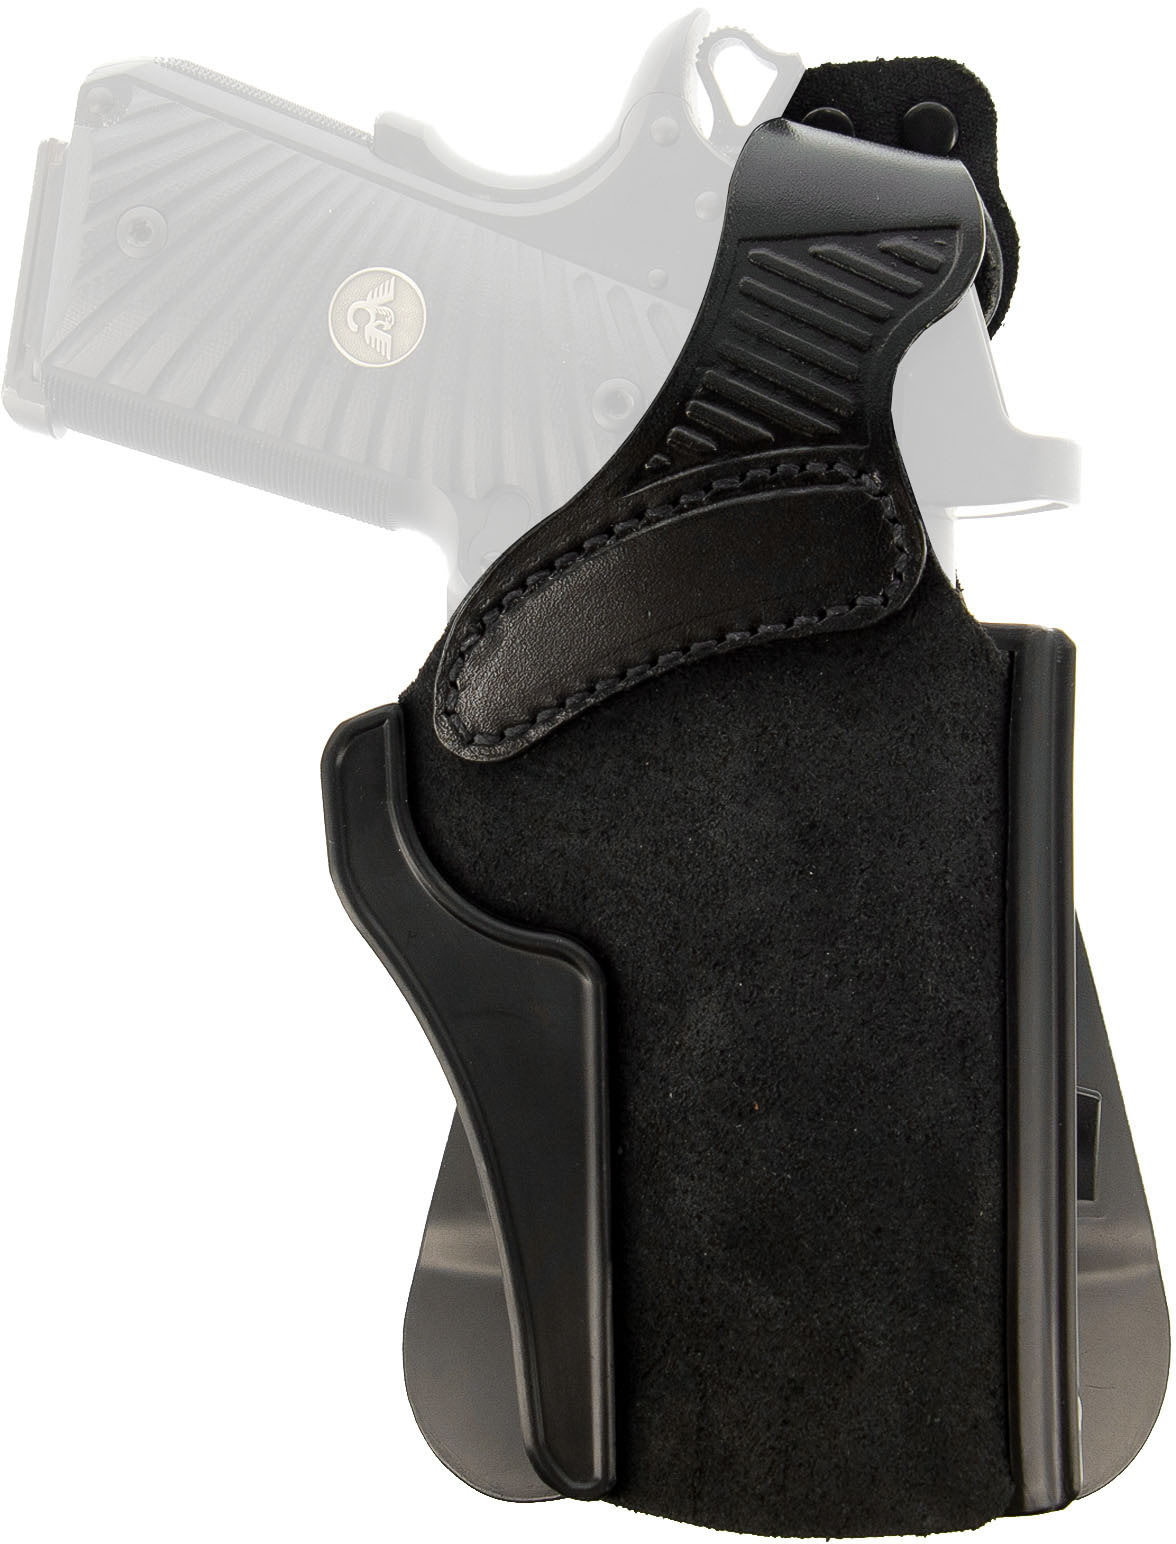 Galco Wraith 2 Belt/Paddle Holster Glock 26 Gen 3-5 Black Right W2-286RB